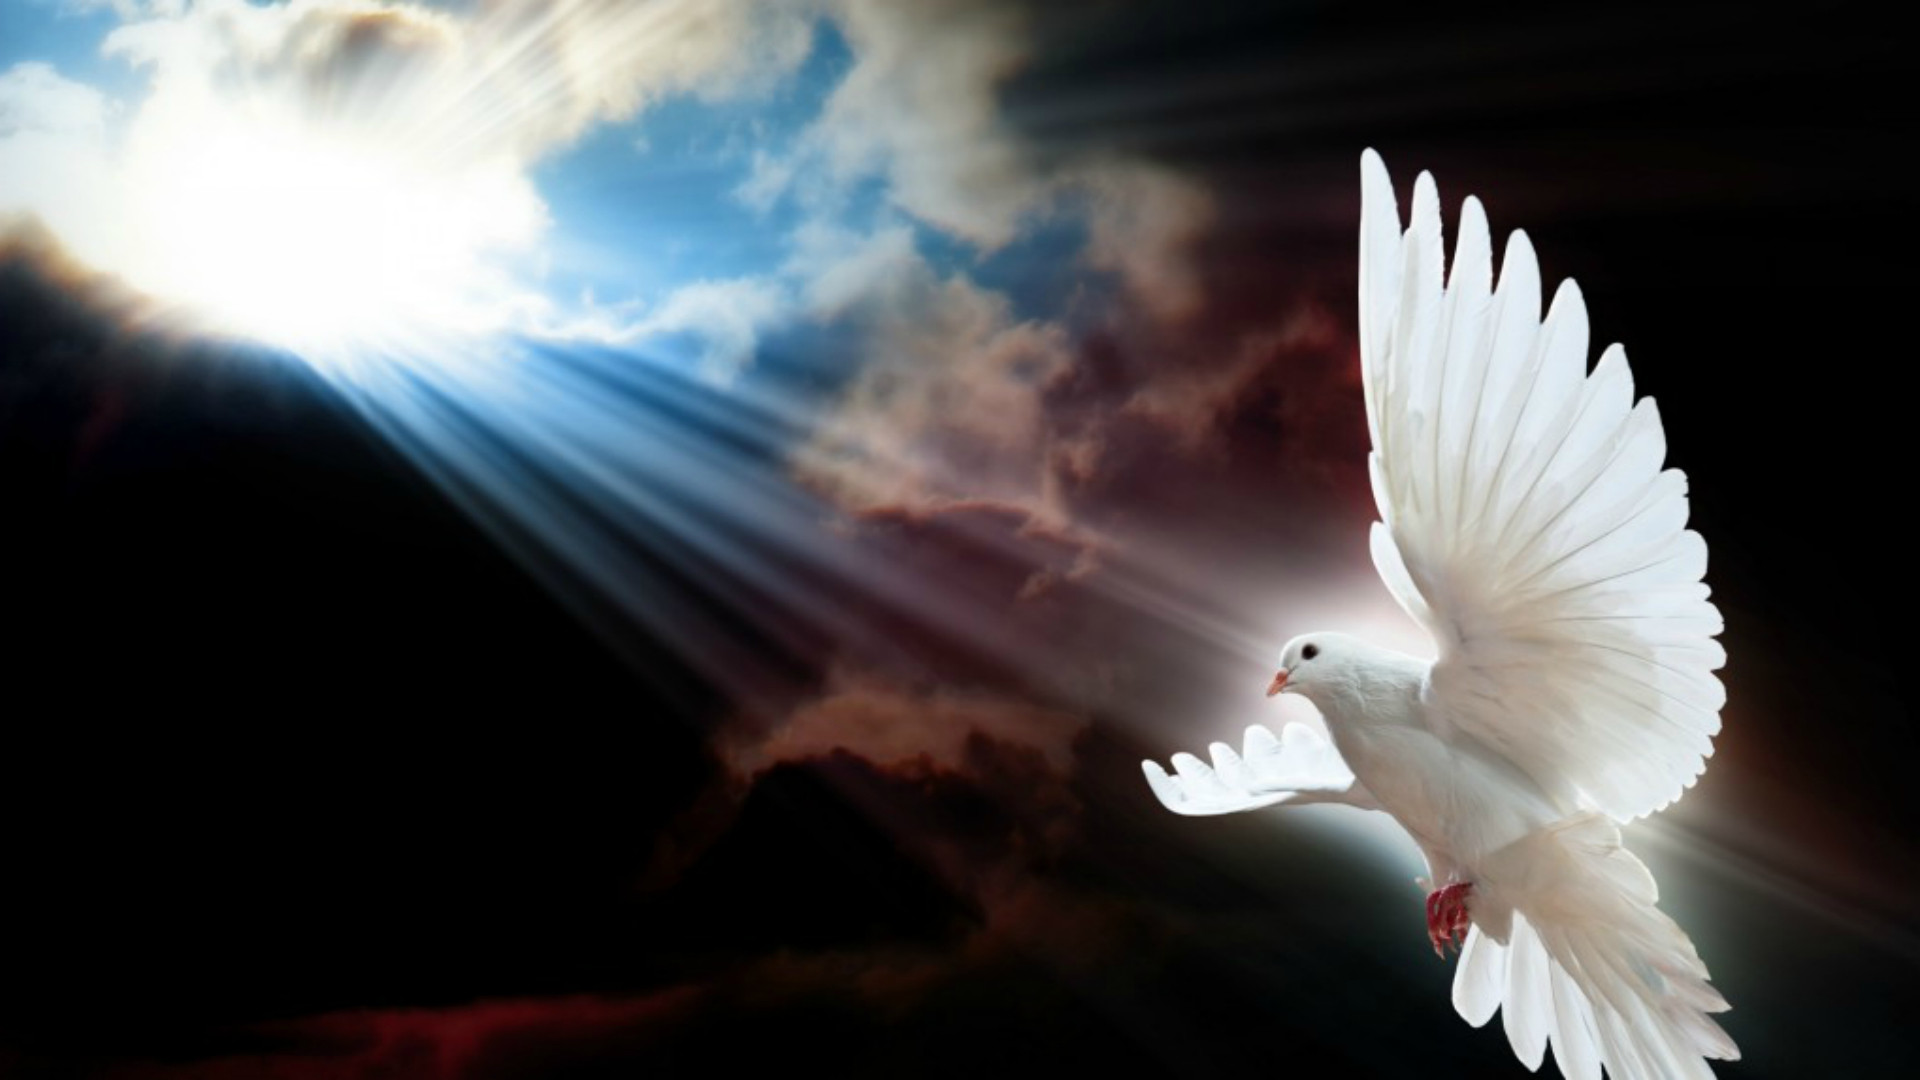 1920x1080 The Holy Spirit Comforts and Guides.